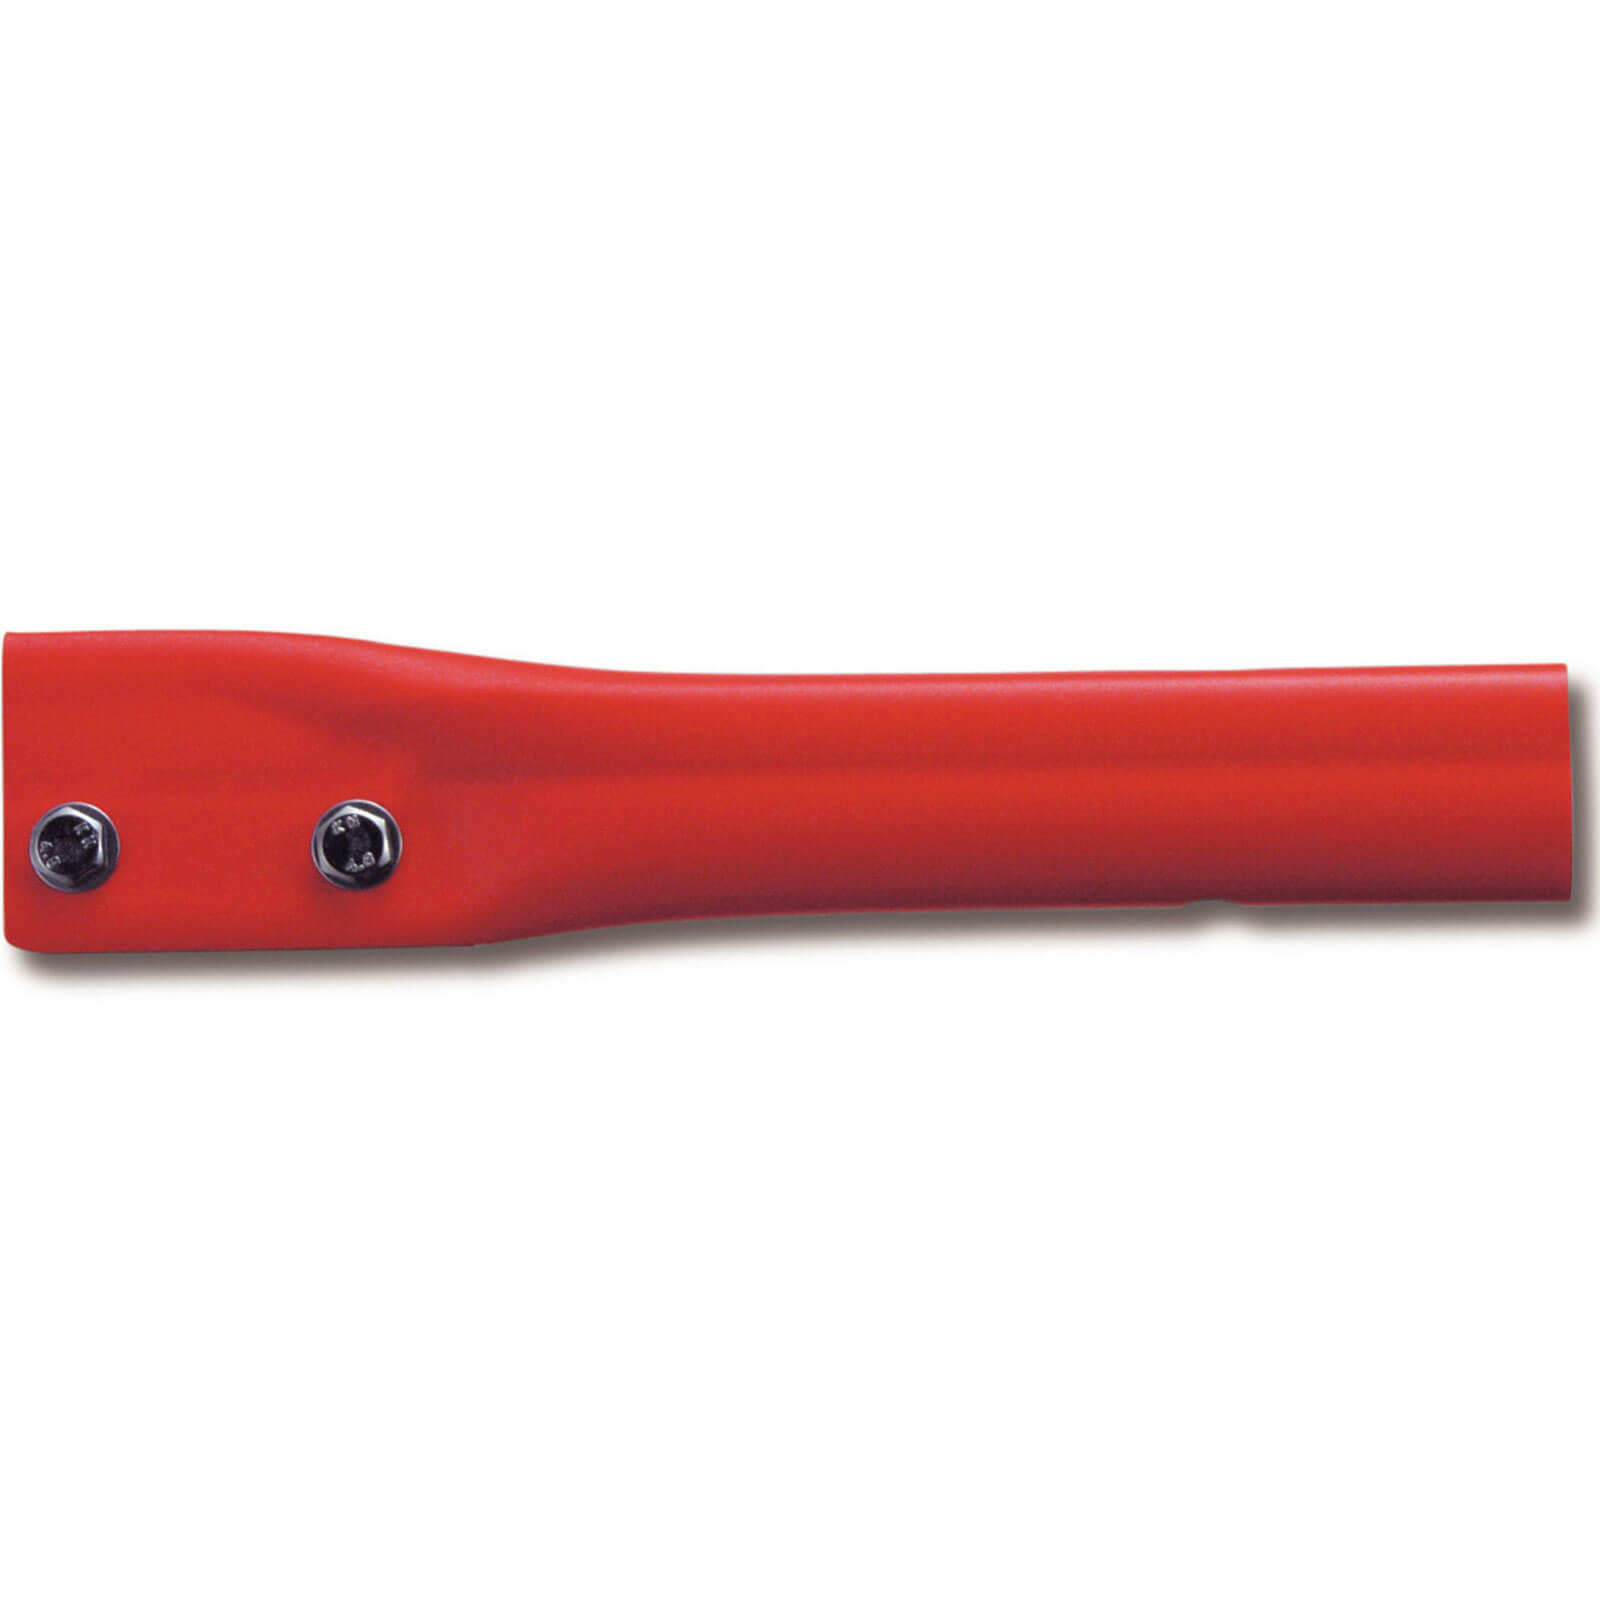 Photo of Ars Pole Saw Blade Grip For Uv-40 And Uv-47